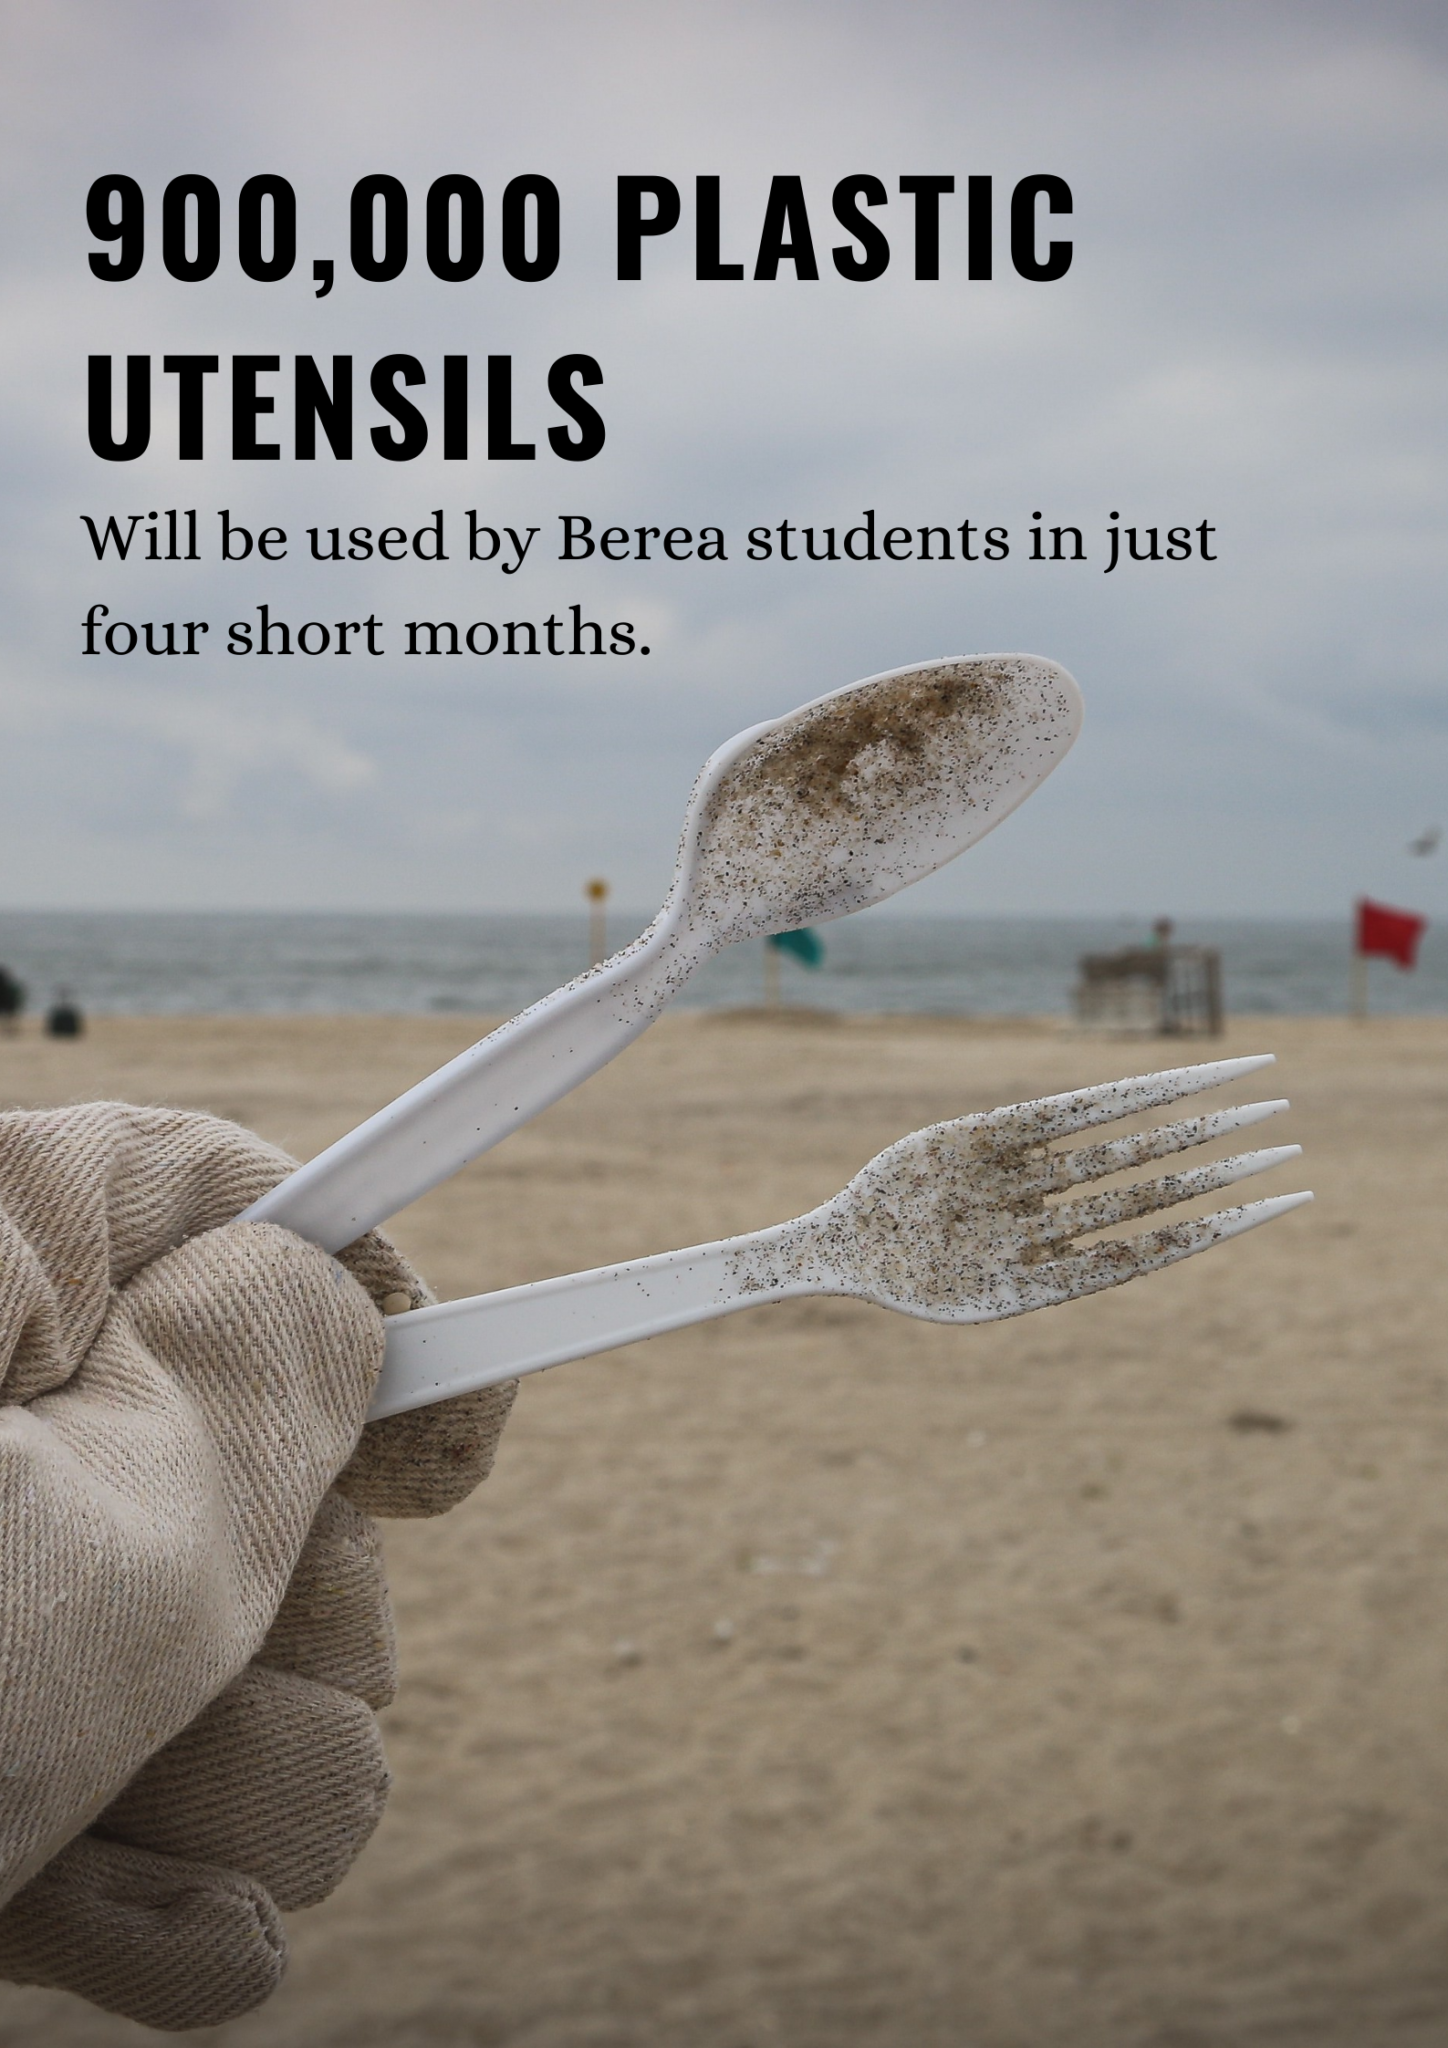 900000 plastic utensils will be used by Berea students in just four short months